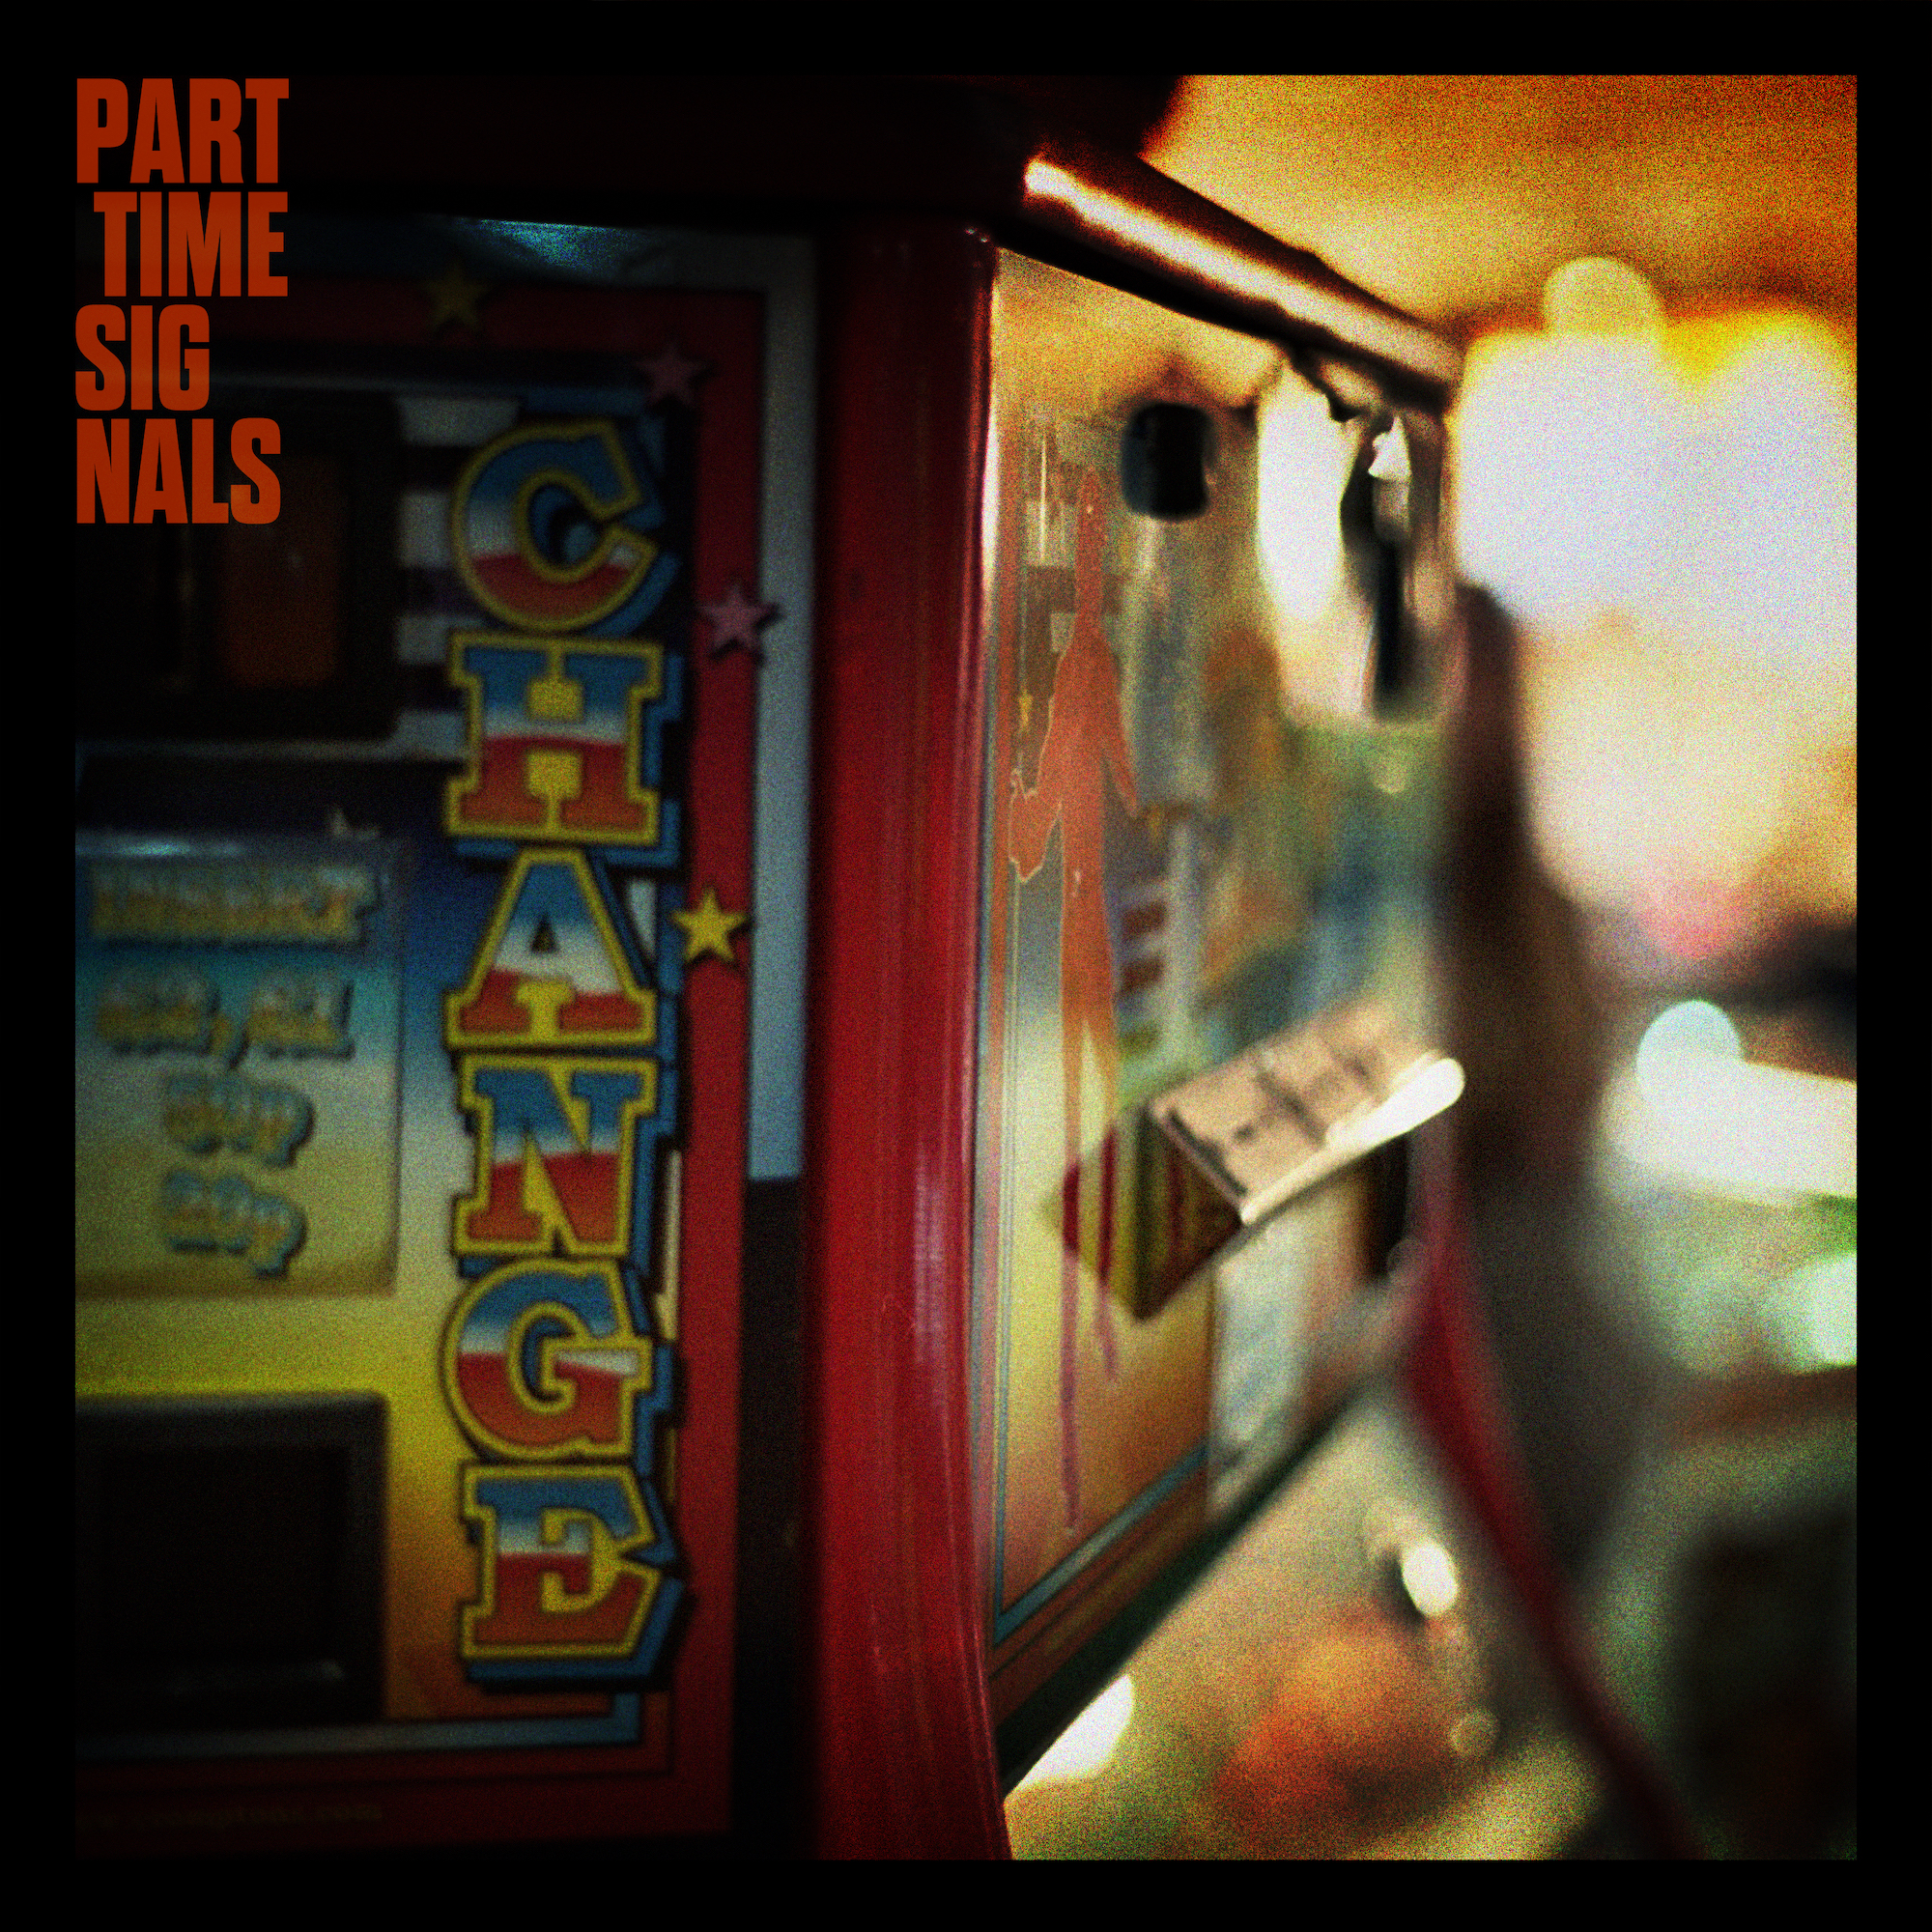 LISTEN: “Lazy” by Part Time Signals